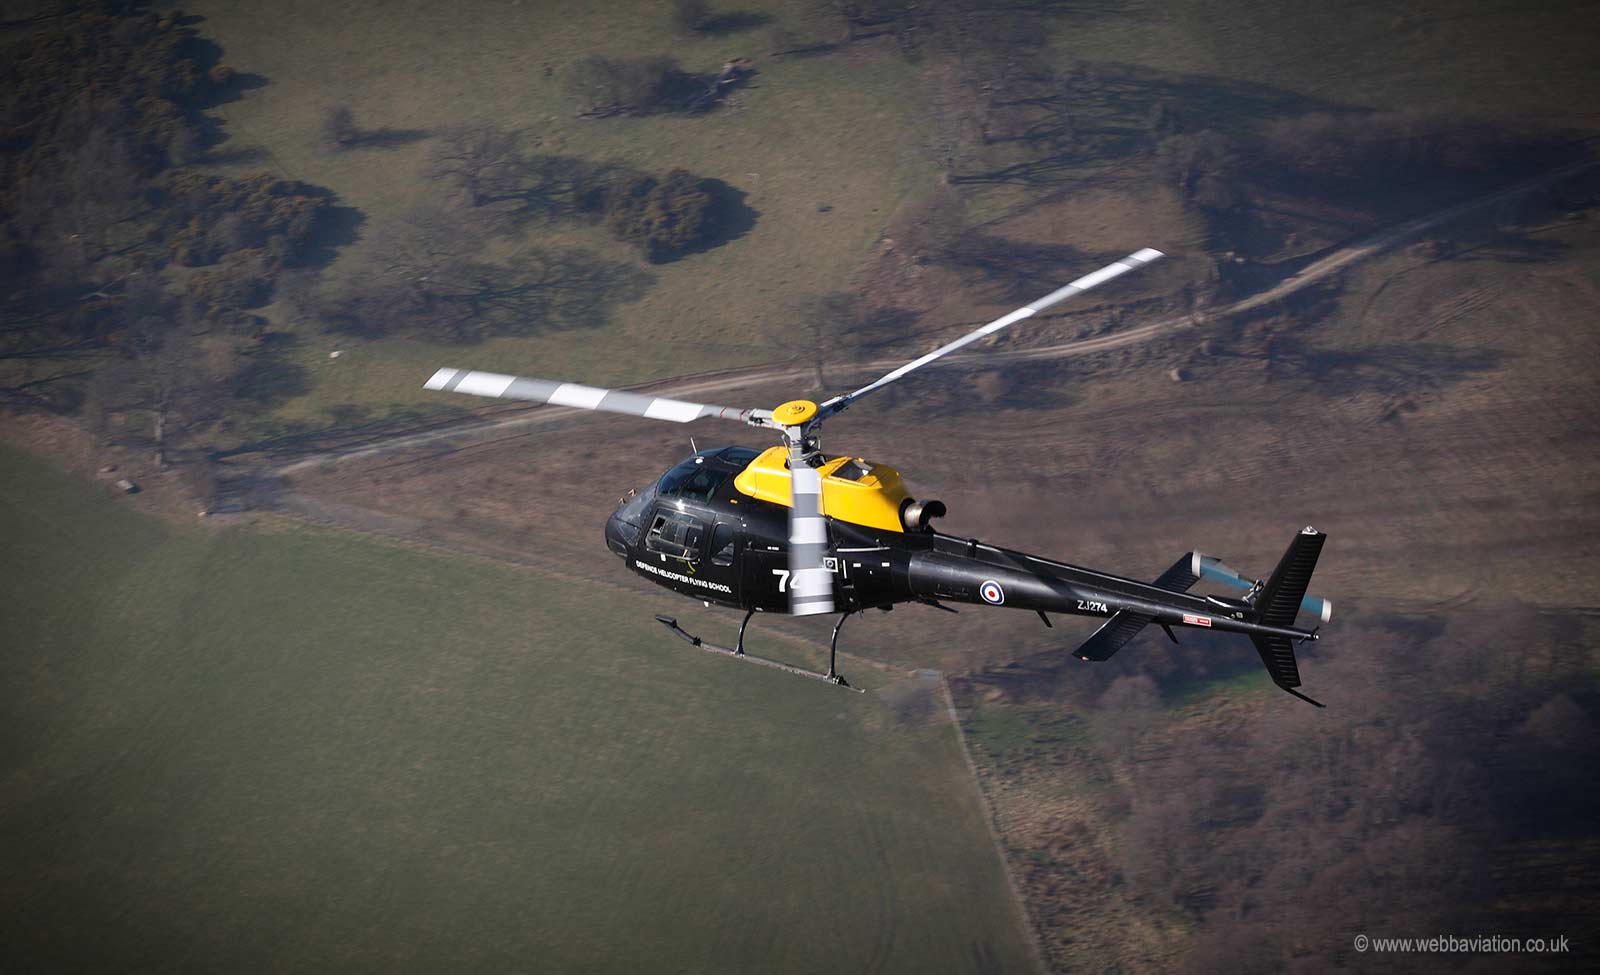 RAF Squirrel HT1 training helcopter over Llangollen aerial photograph